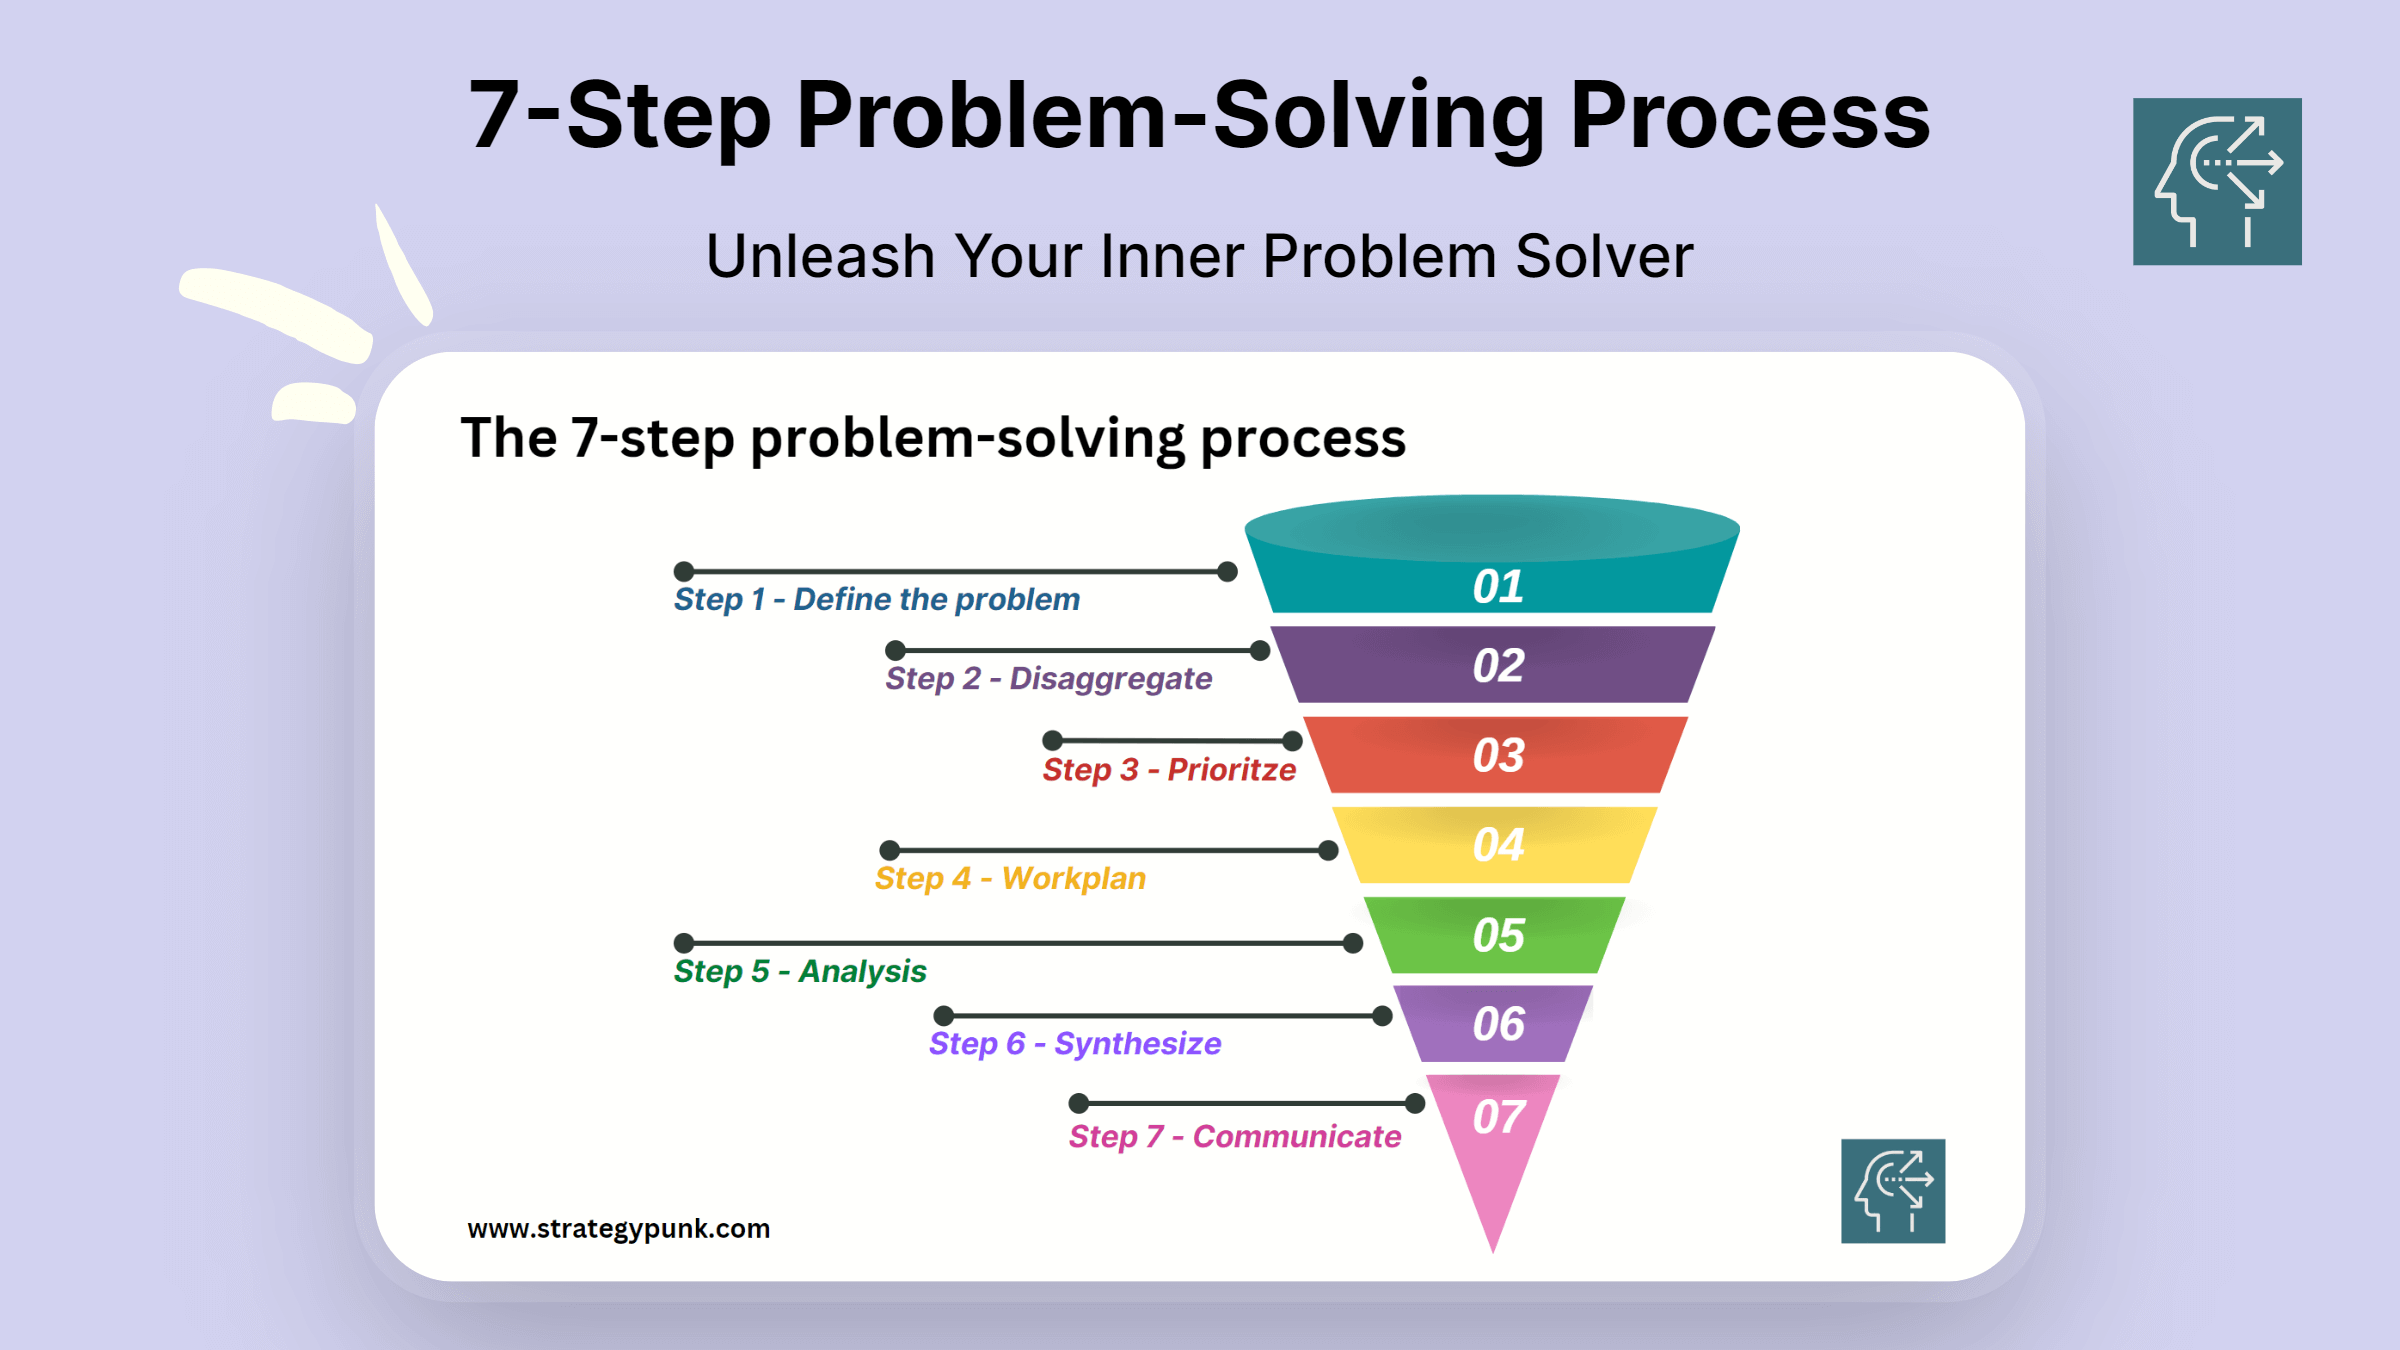 what problem solving step comes third